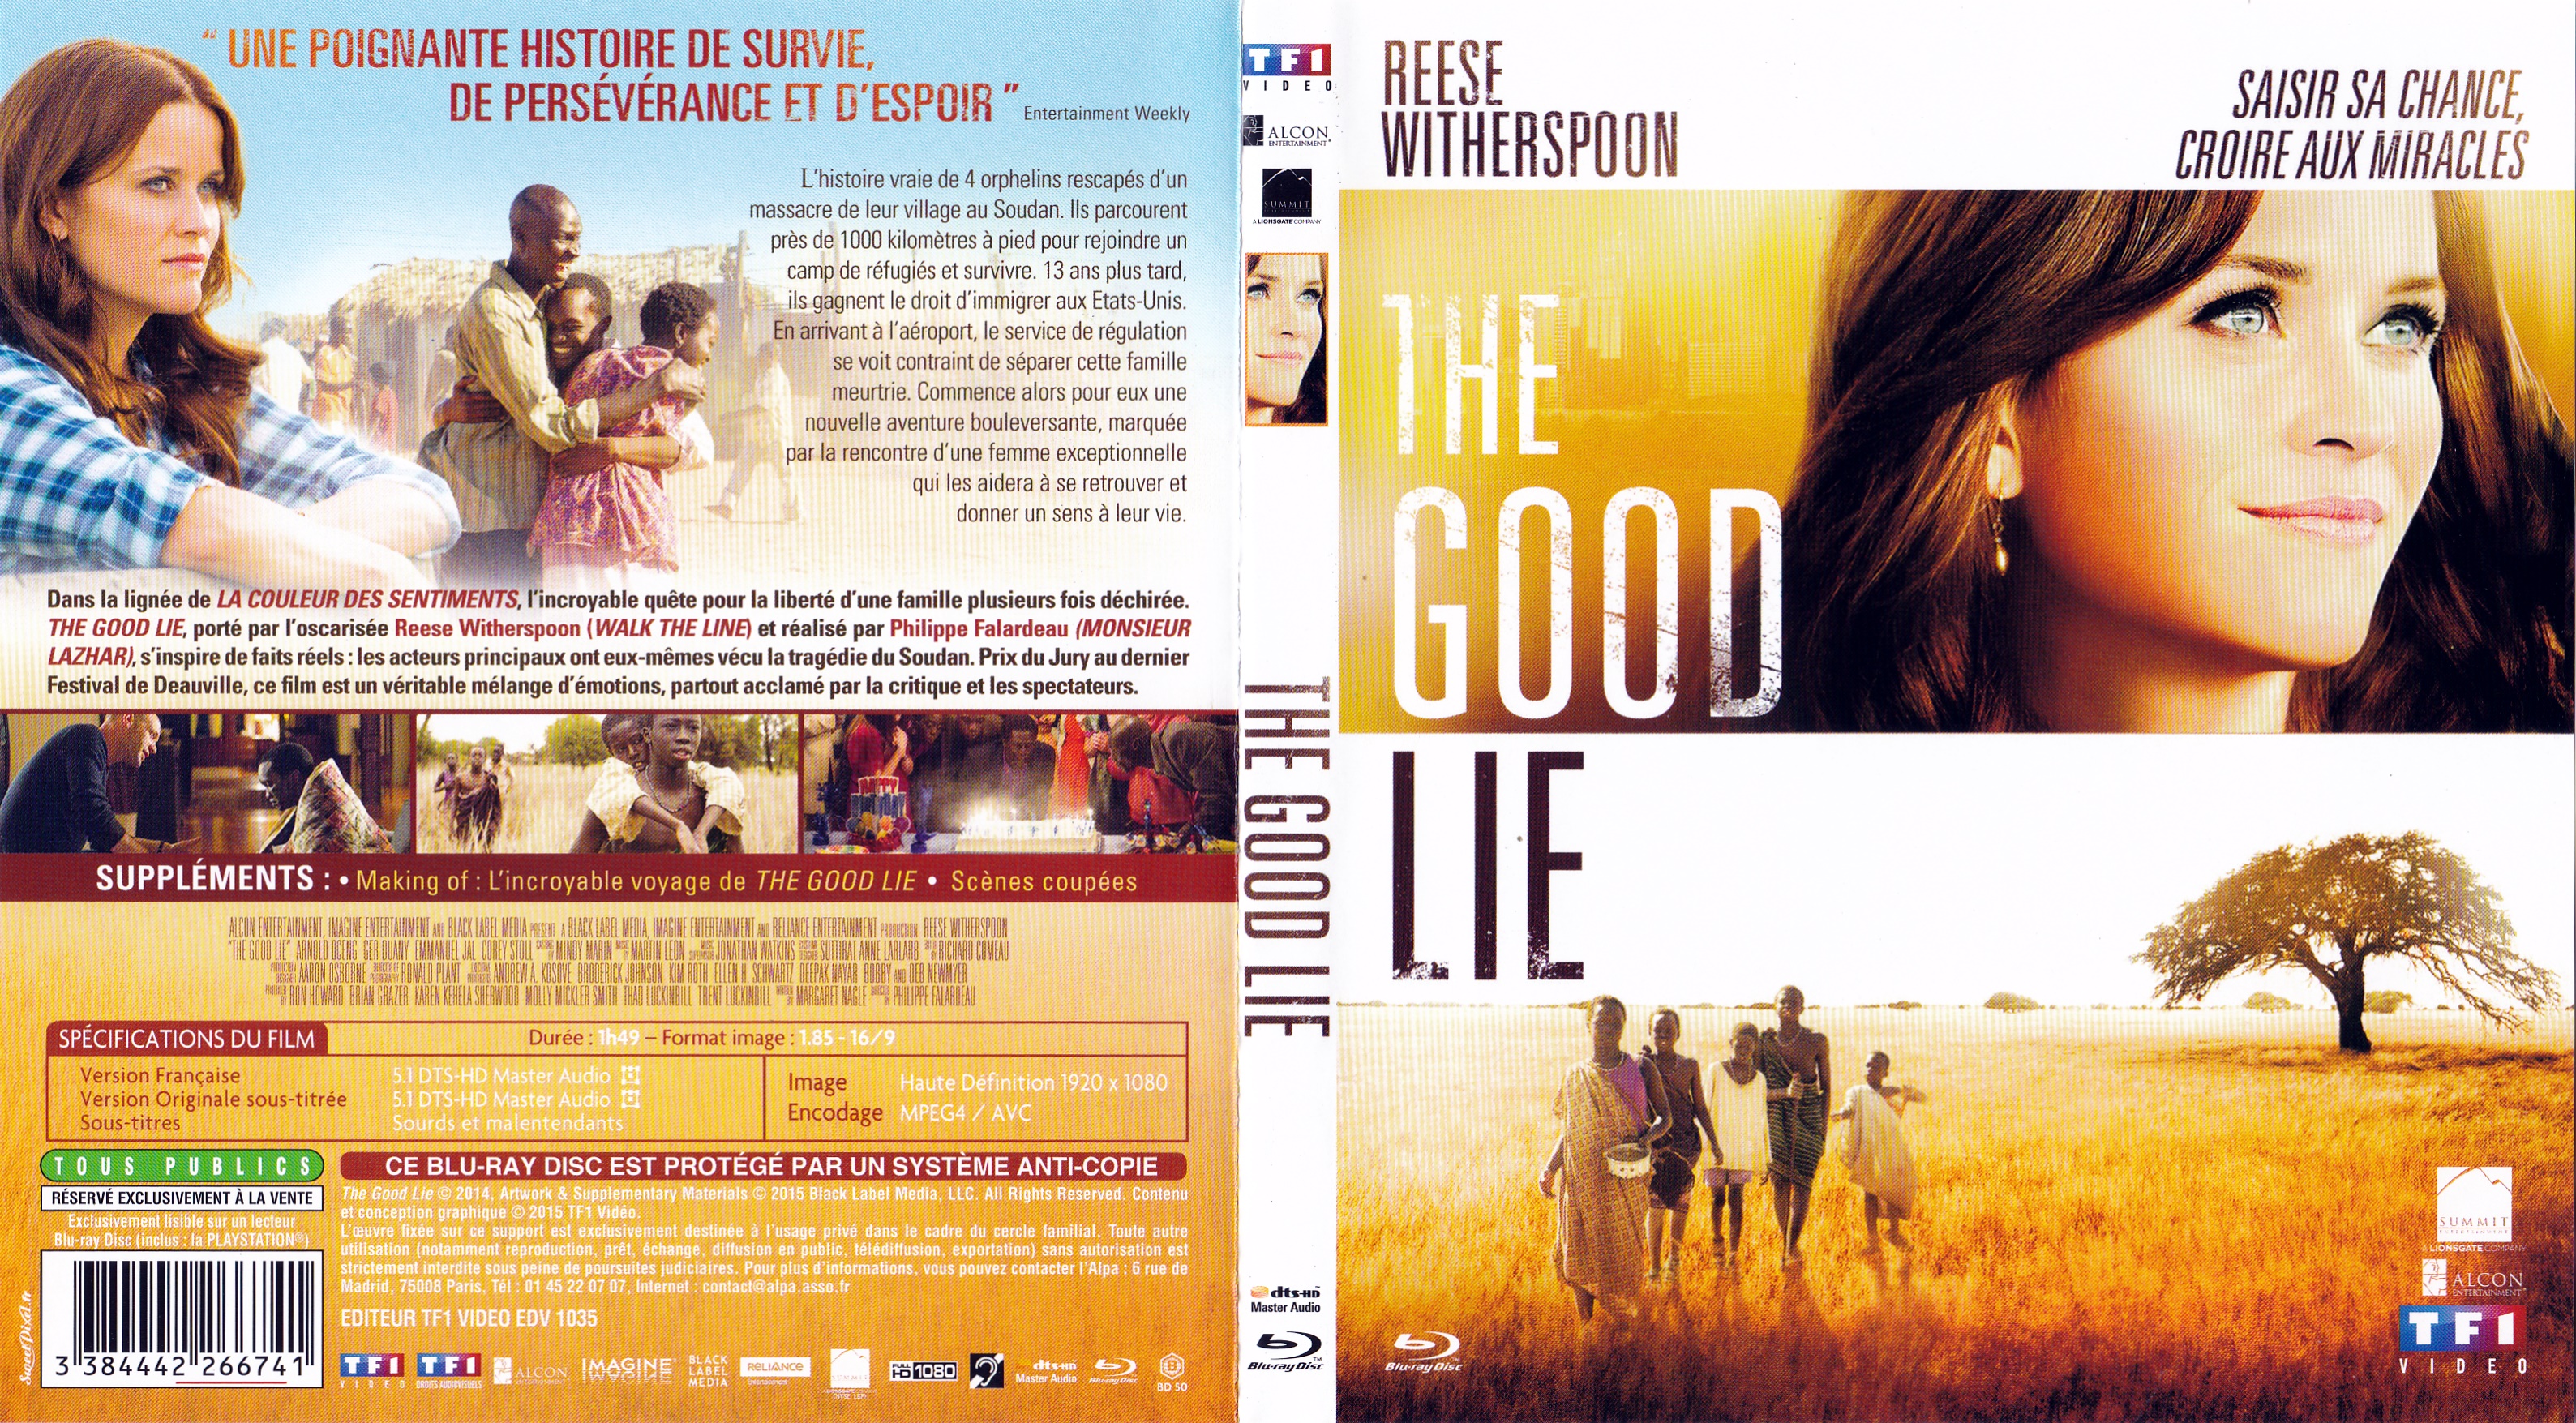 Jaquette DVD The good lie (BLU-RAY)